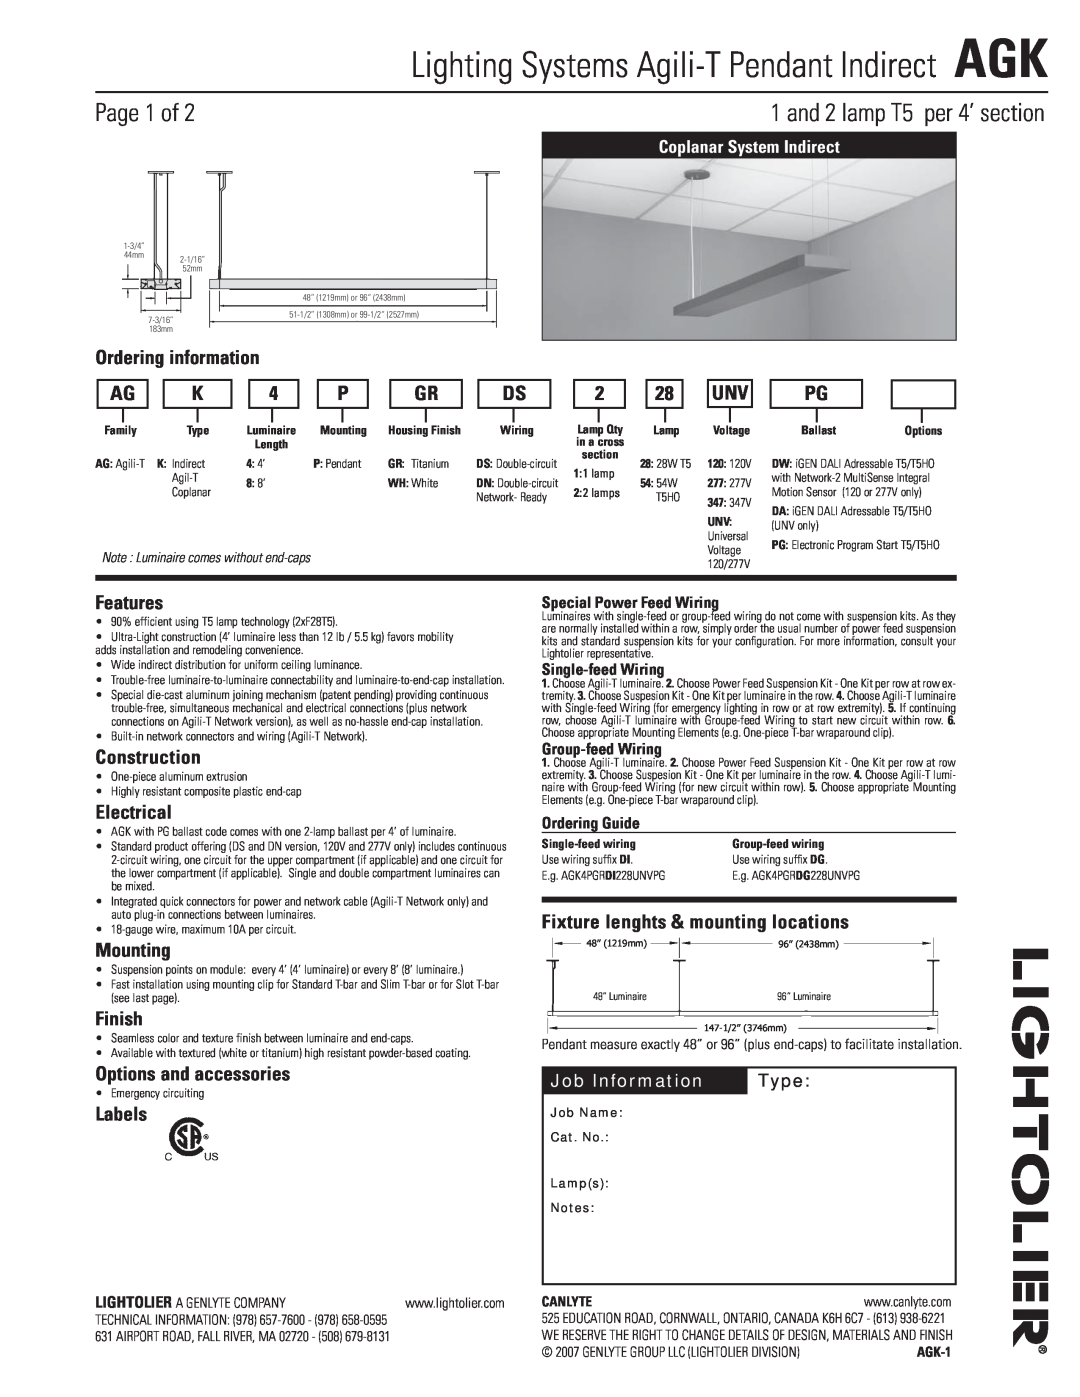 Lightolier AGK-1 manual Lighting Systems Agili-T Pendant Indirect AGK, Page 1 of, and 2 lamp T5 per 4’ section 